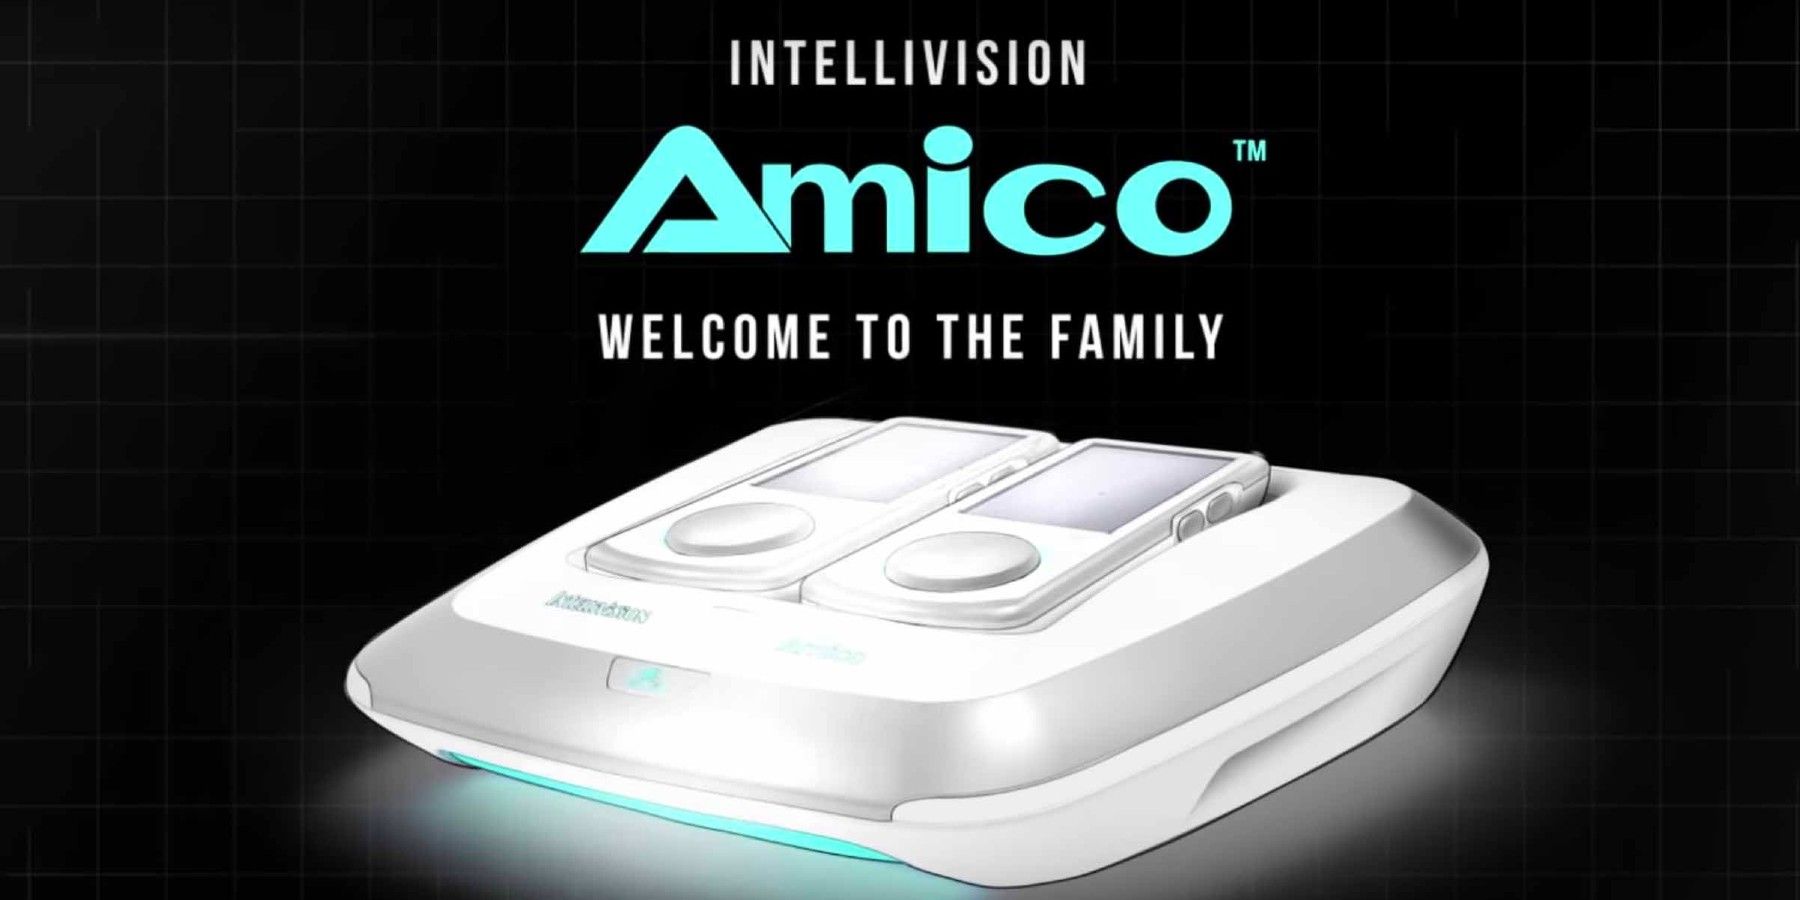 Intellivision-Amico-Trademark-Abandoned-Cancelled-Console